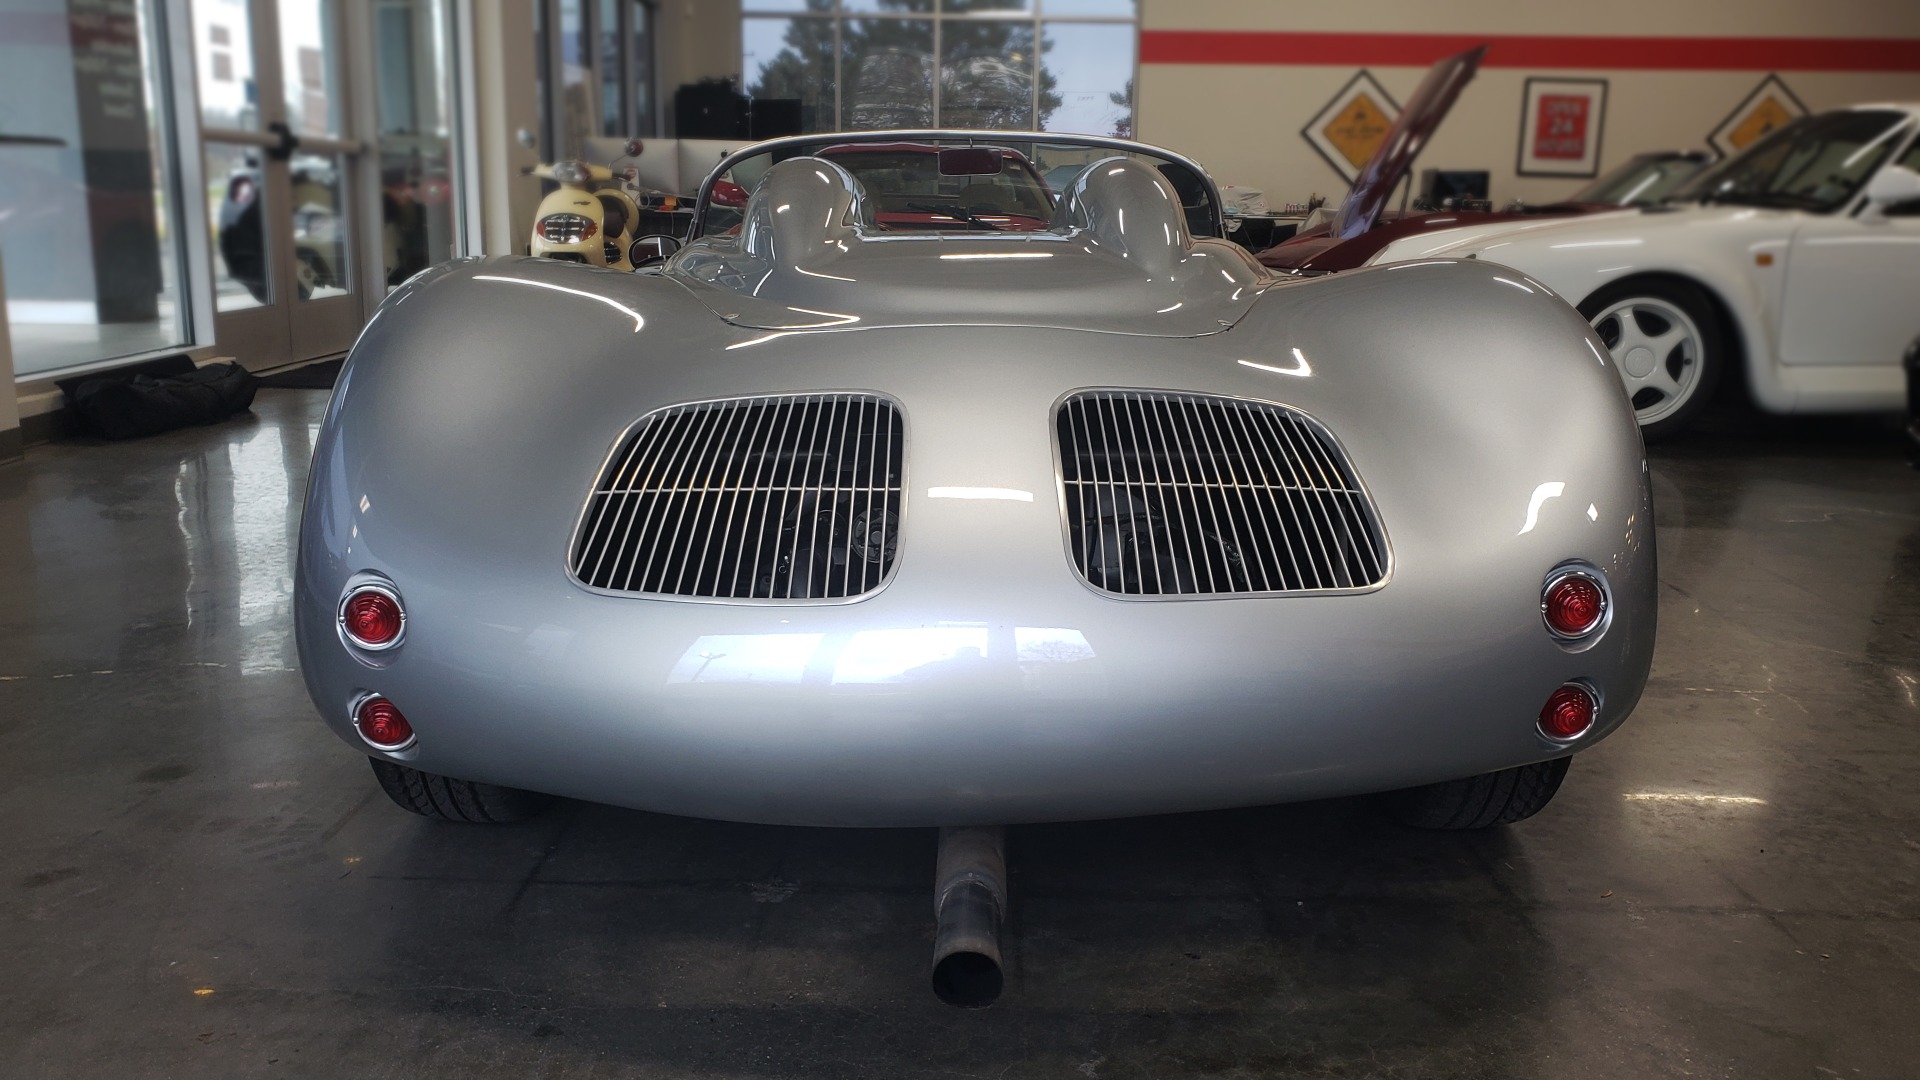 Used 1959 Porsche 718 RSK SPYDER REPLICA / 2275CC W/44MM WEBER (160HP) / 4-SPD MANUAL for sale Sold at Formula Imports in Charlotte NC 28227 60